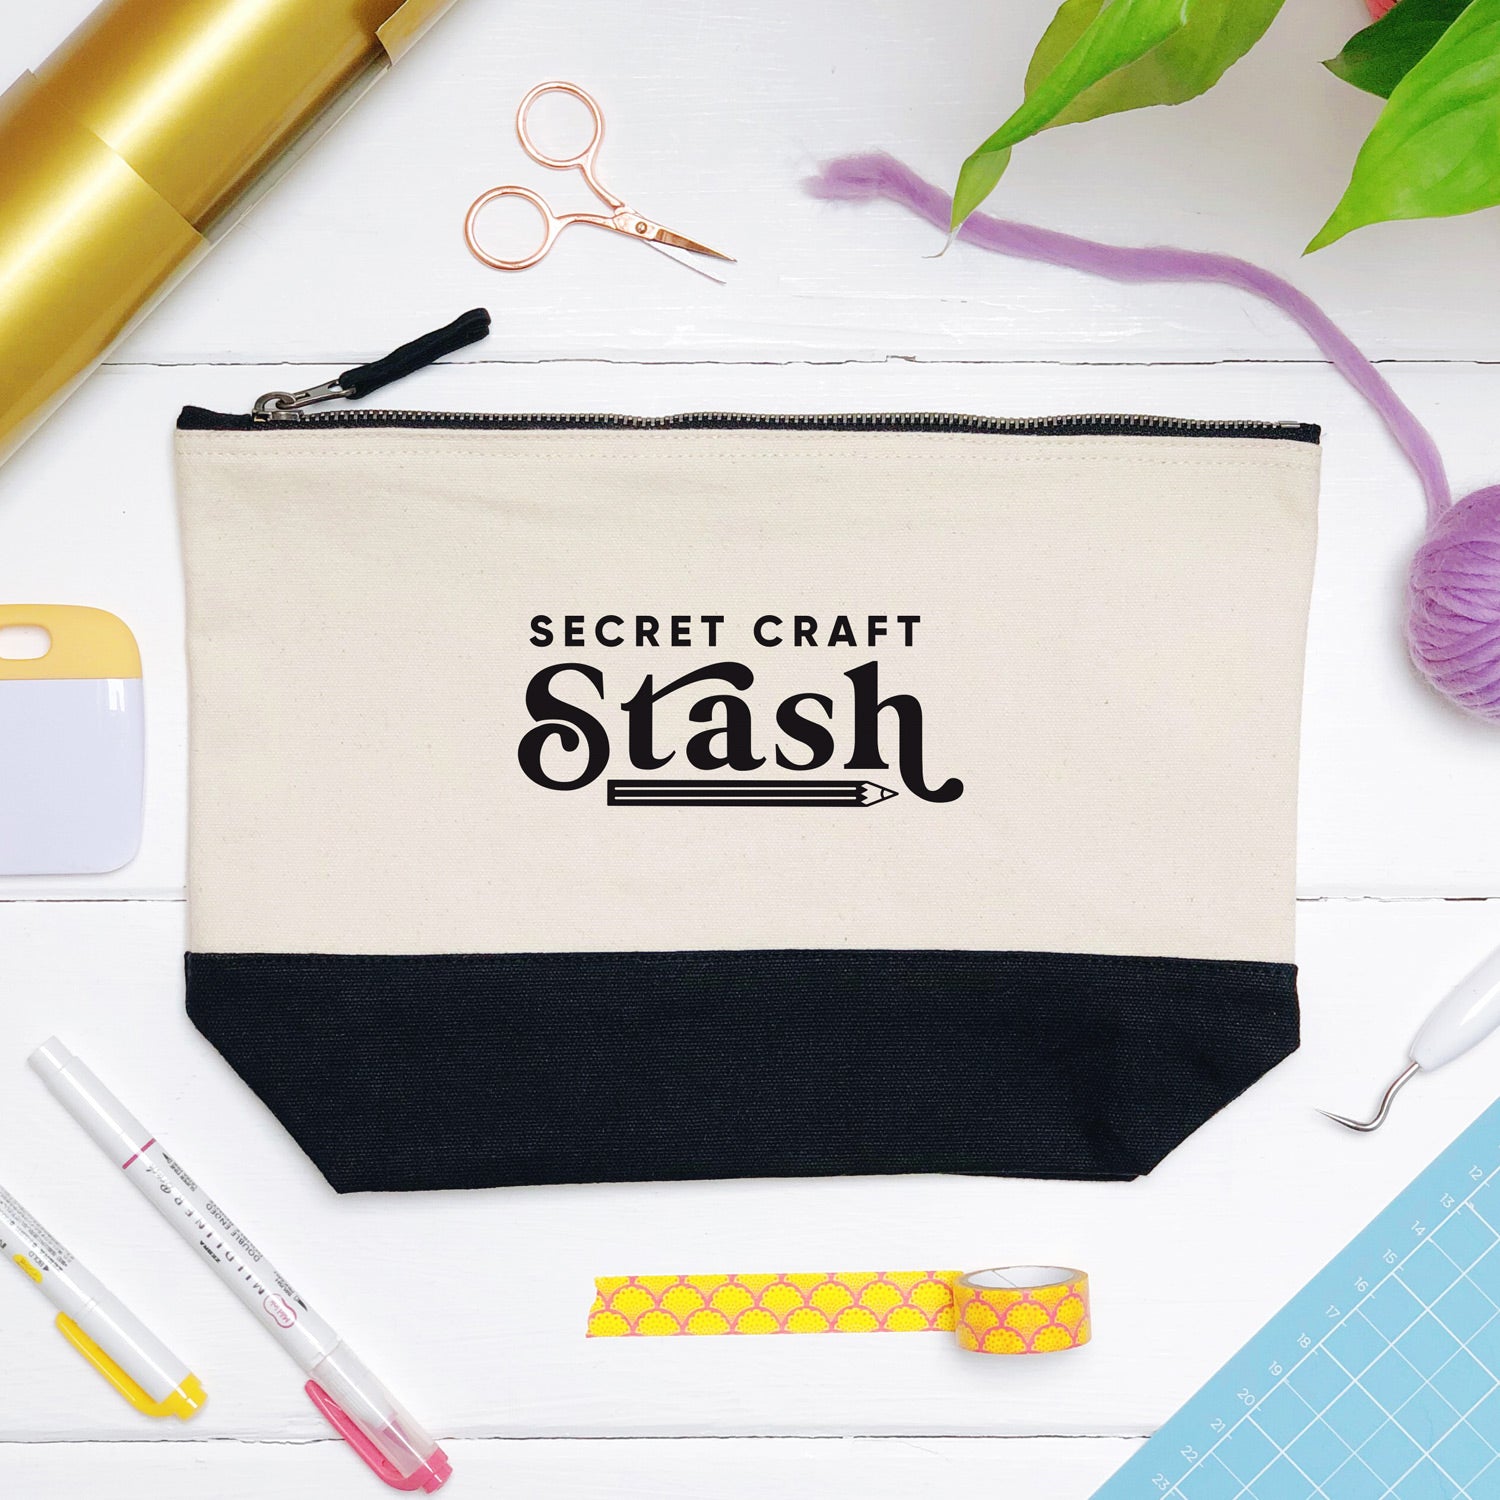 A secret craft stash cotton storage bag, natural in colour with a black box bottom base photographed in a flat lay style surrounded by craft supplies